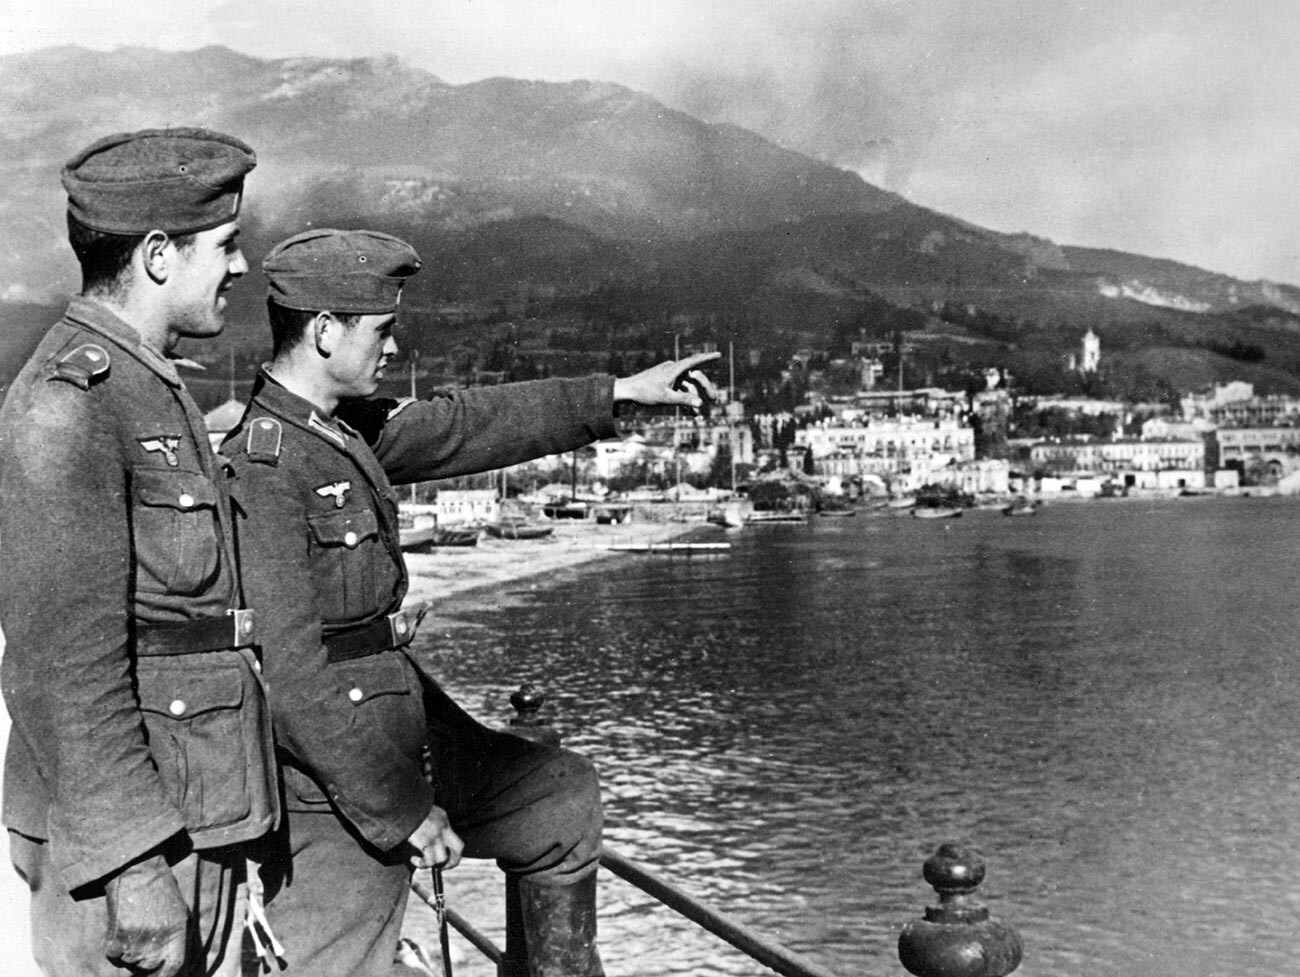 Two German army soldiers observe from a vantage point the city of Yalta.